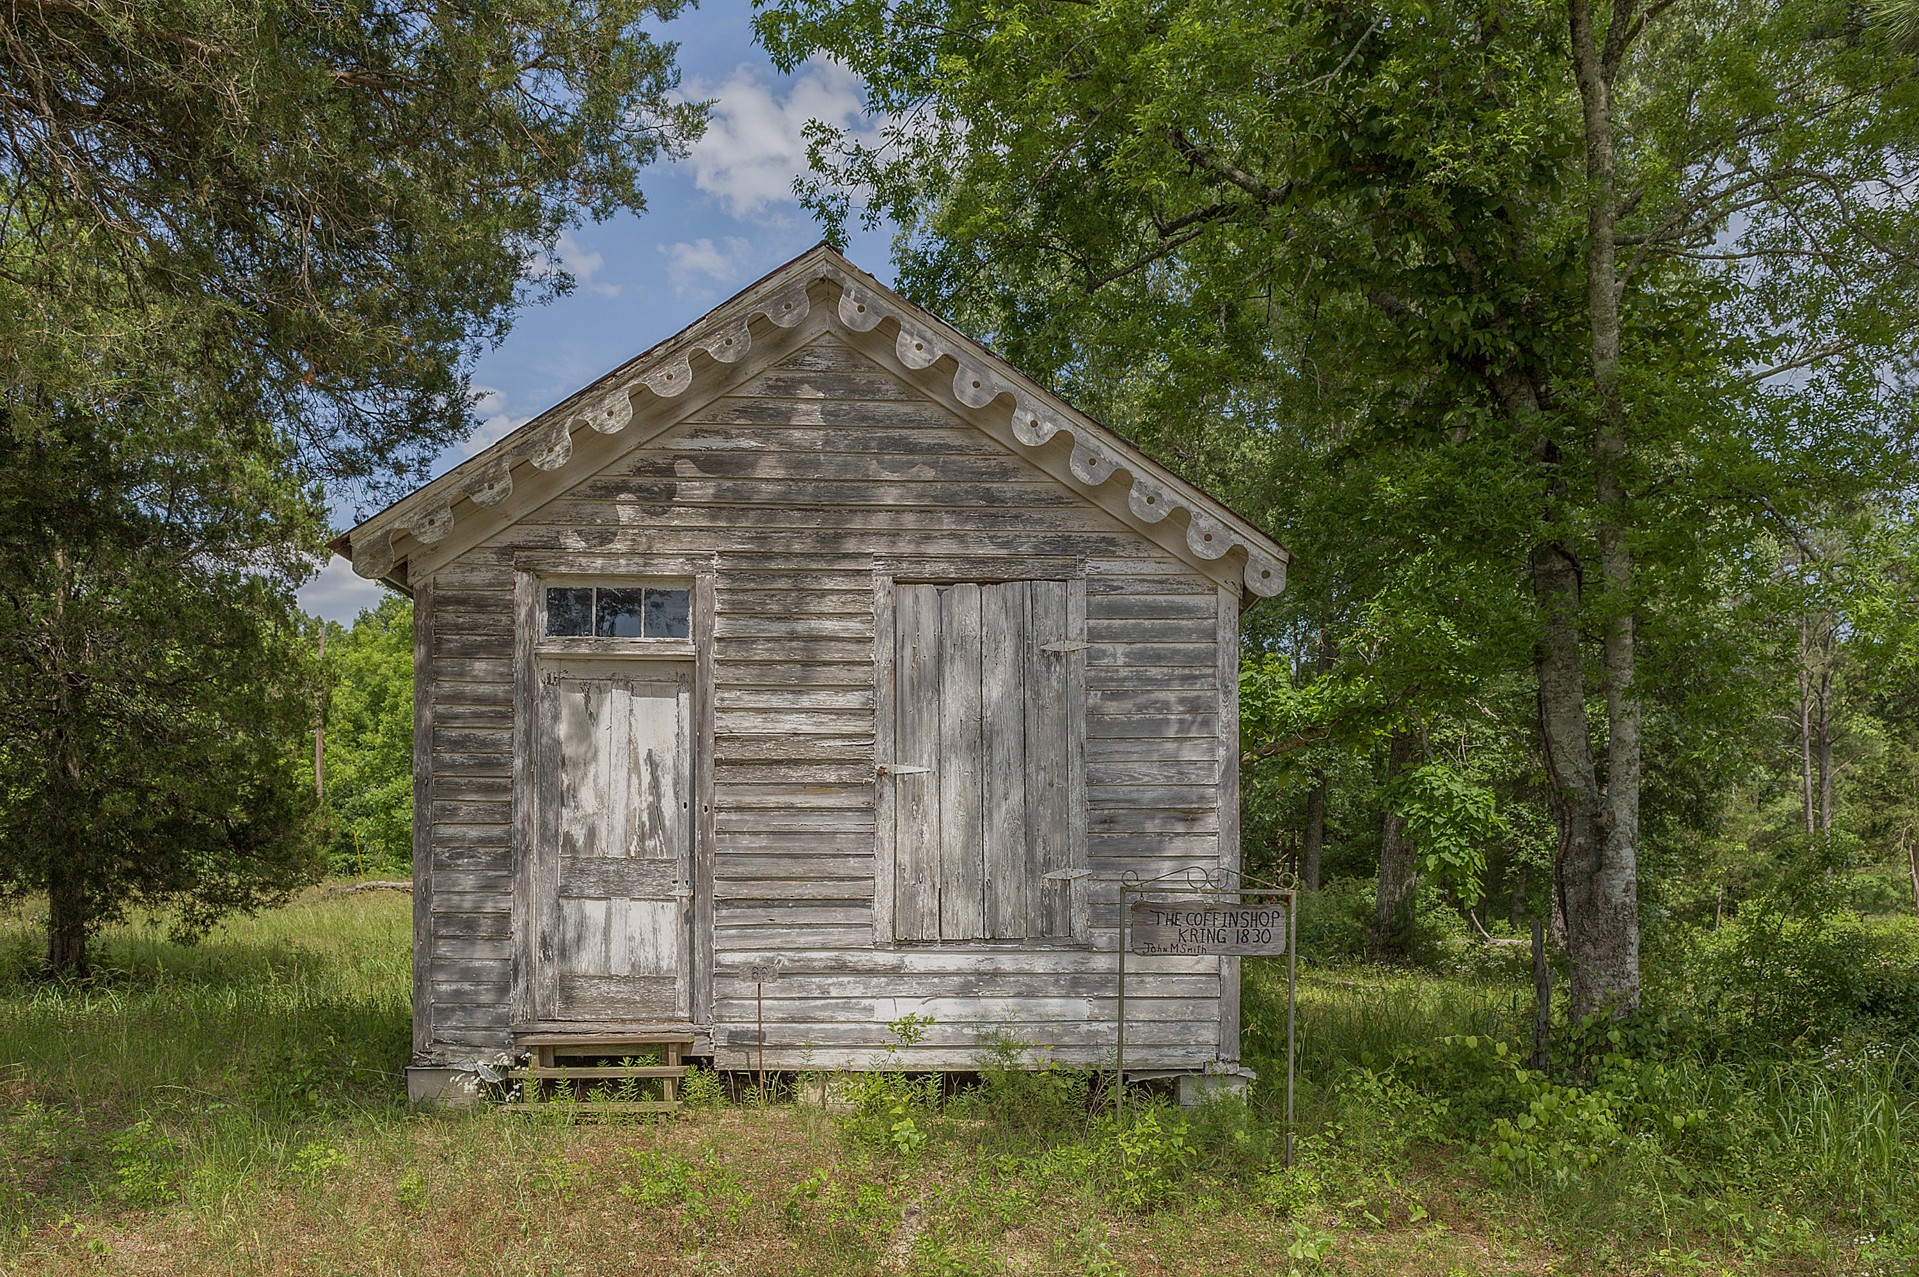 Kring's Coffin Shop, Gainesville, Sumter County by Robin McDonald